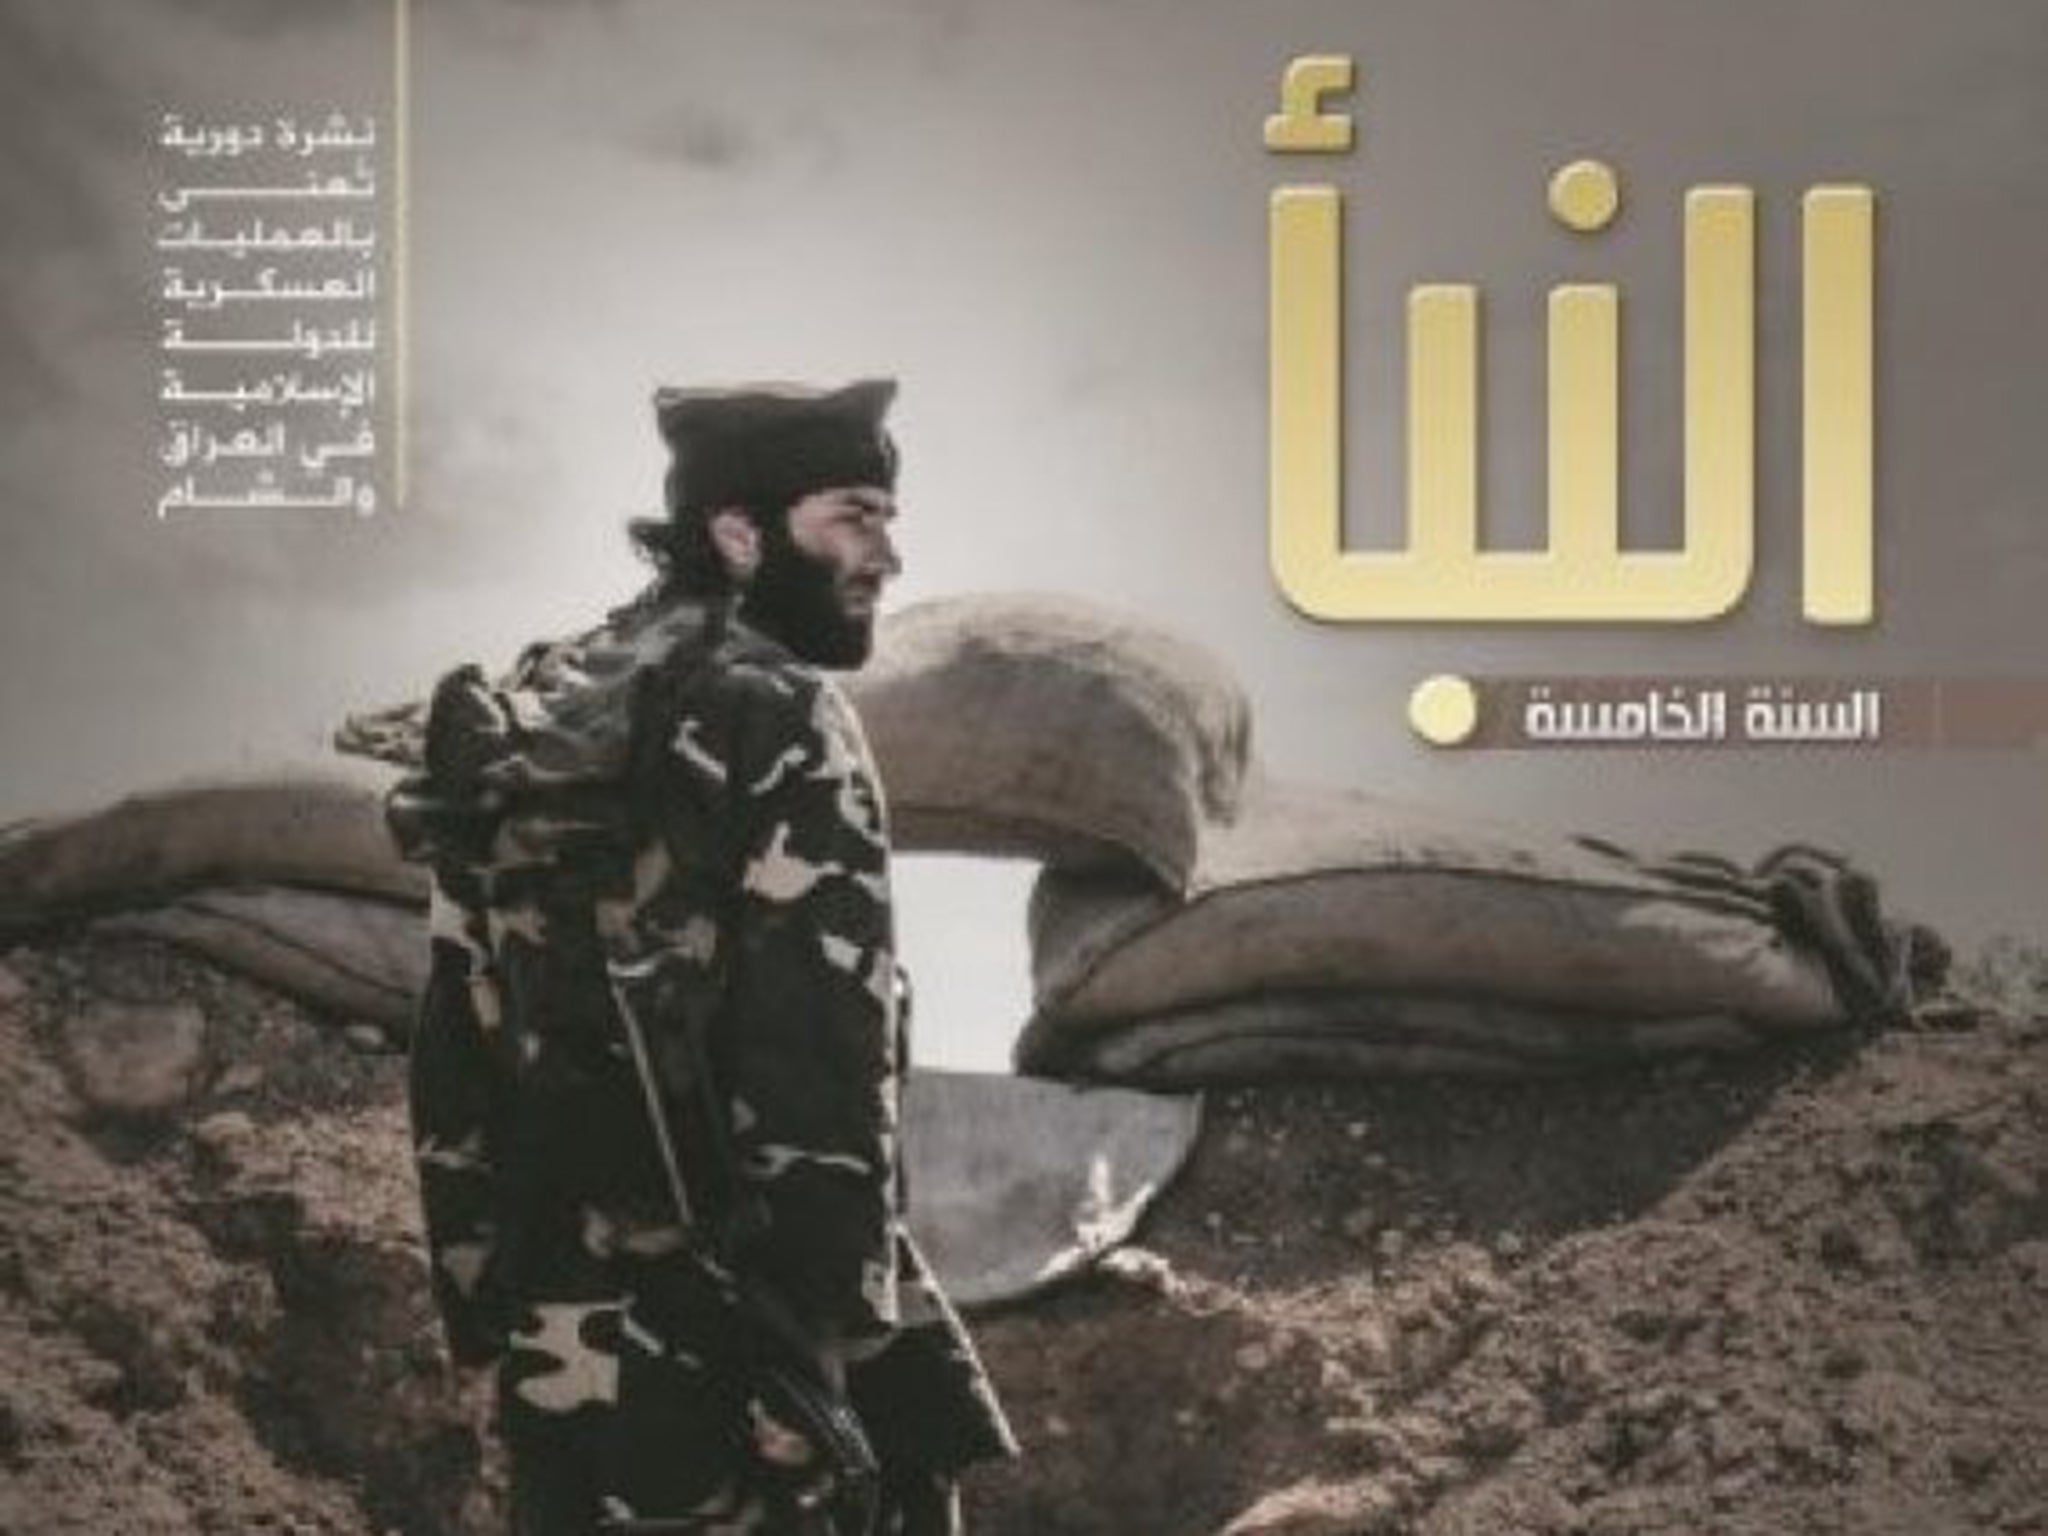 Isis published its annual report in March, showing how
the group intended to use its resources